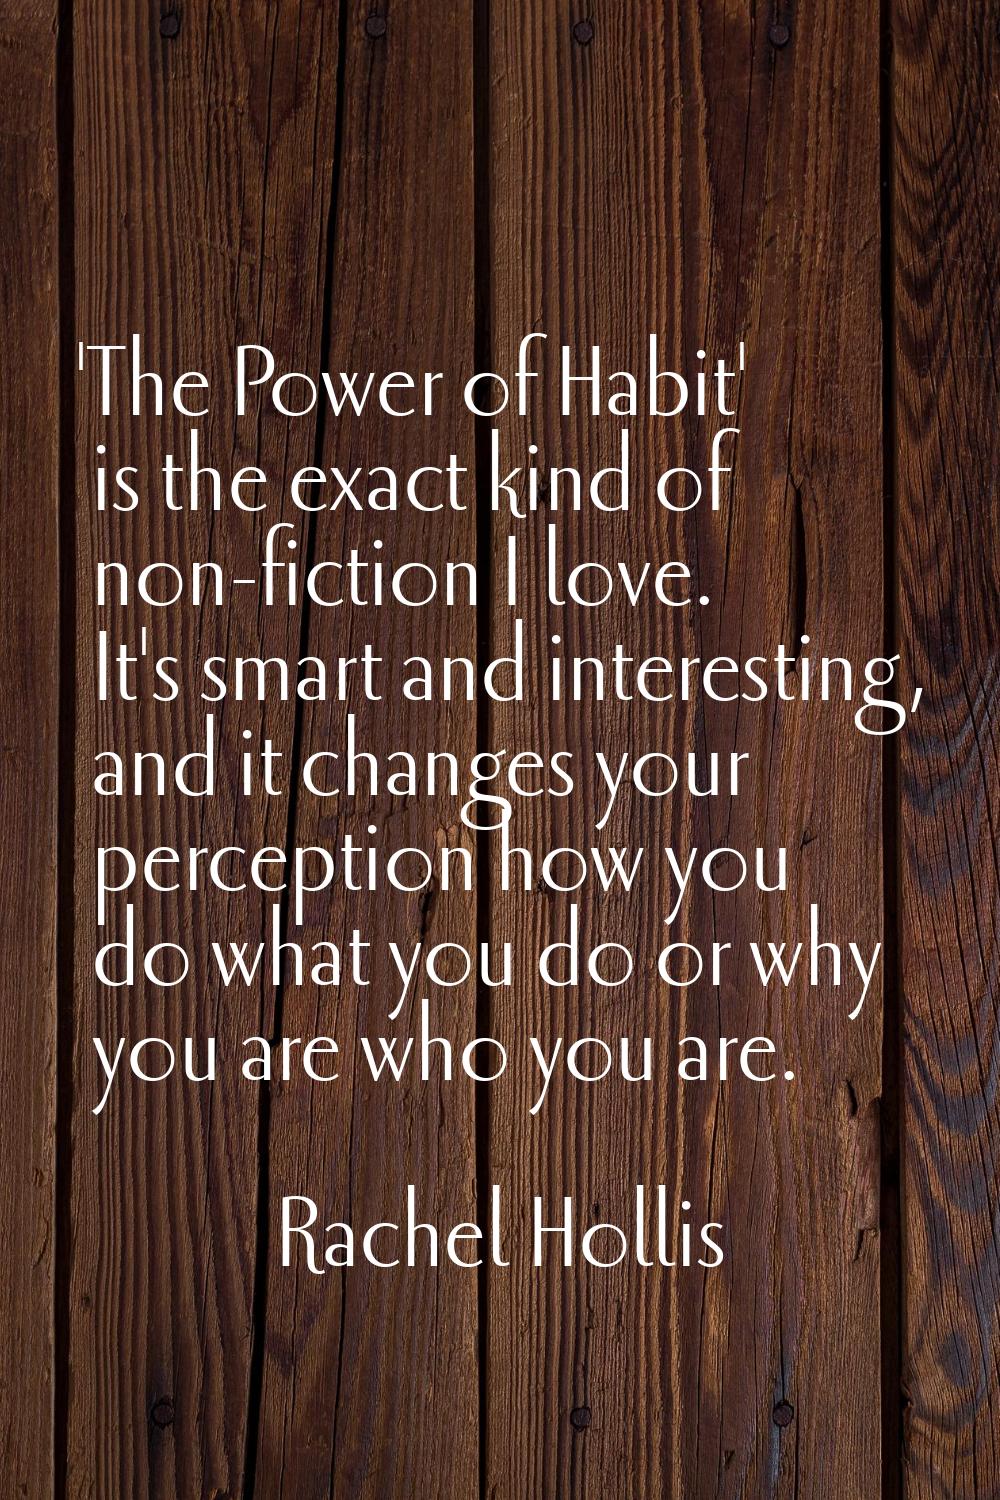 'The Power of Habit' is the exact kind of non-fiction I love. It's smart and interesting, and it ch